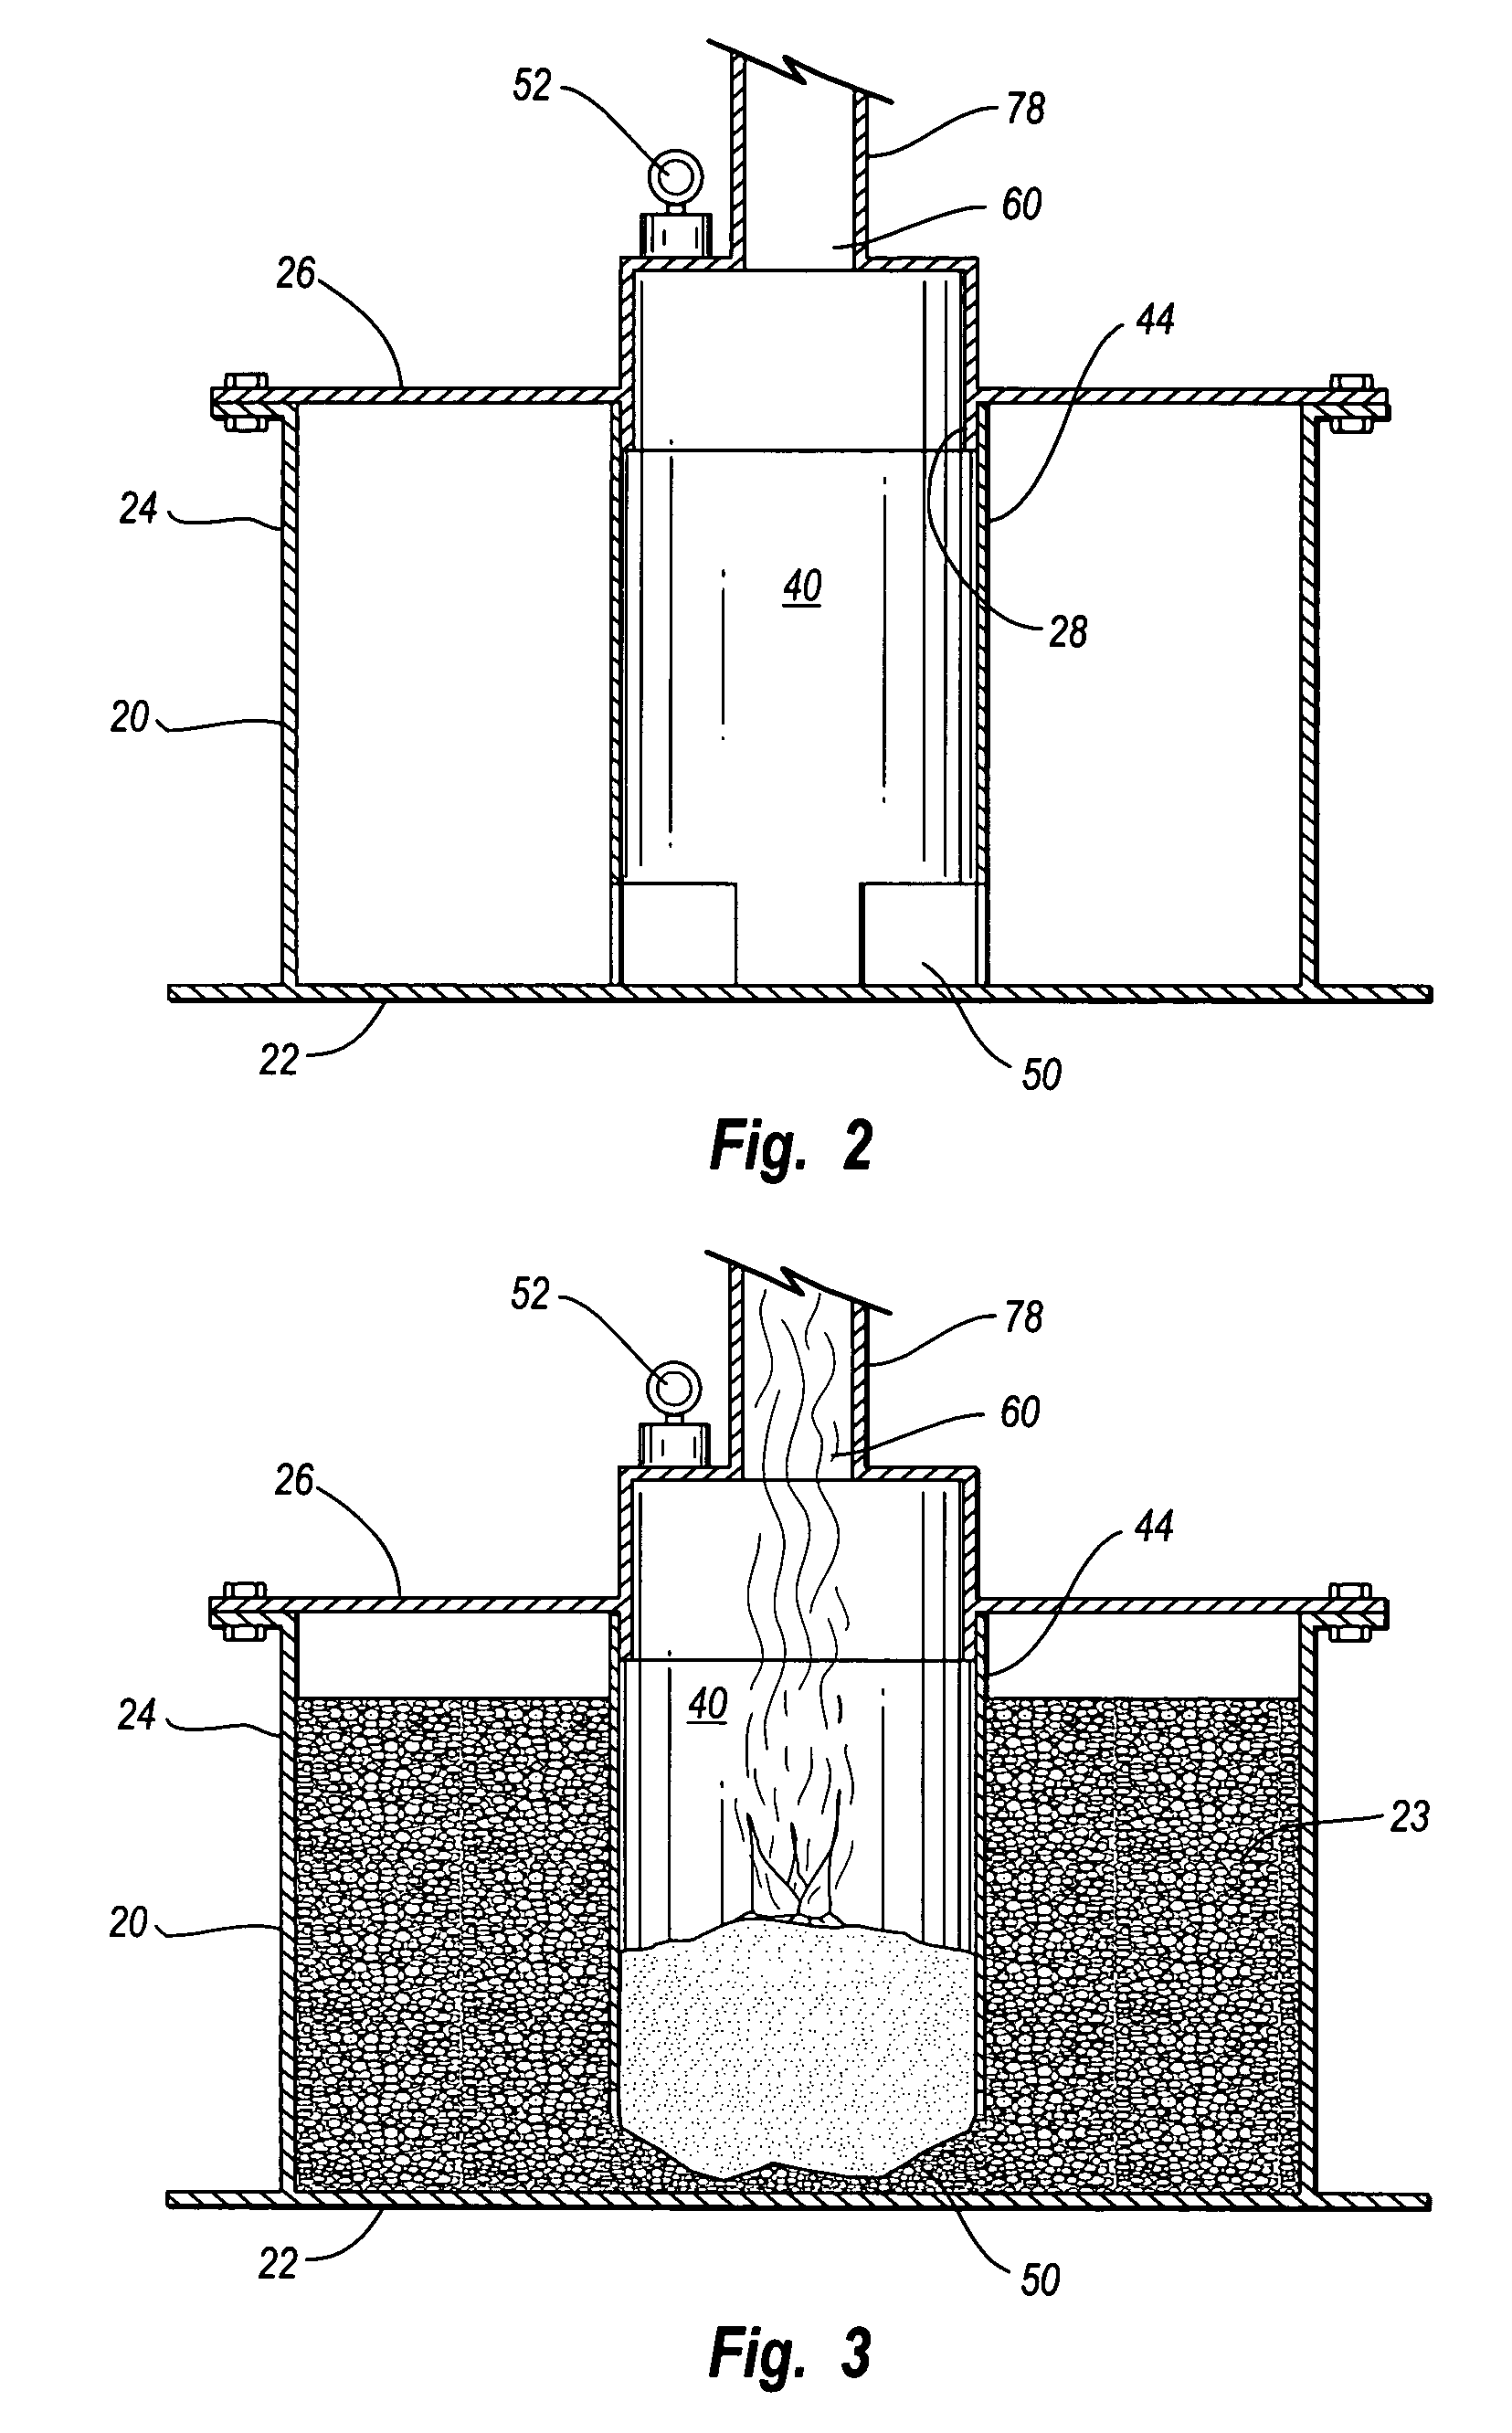 Concentric hopper and burn chamber for sulphorous acid generator